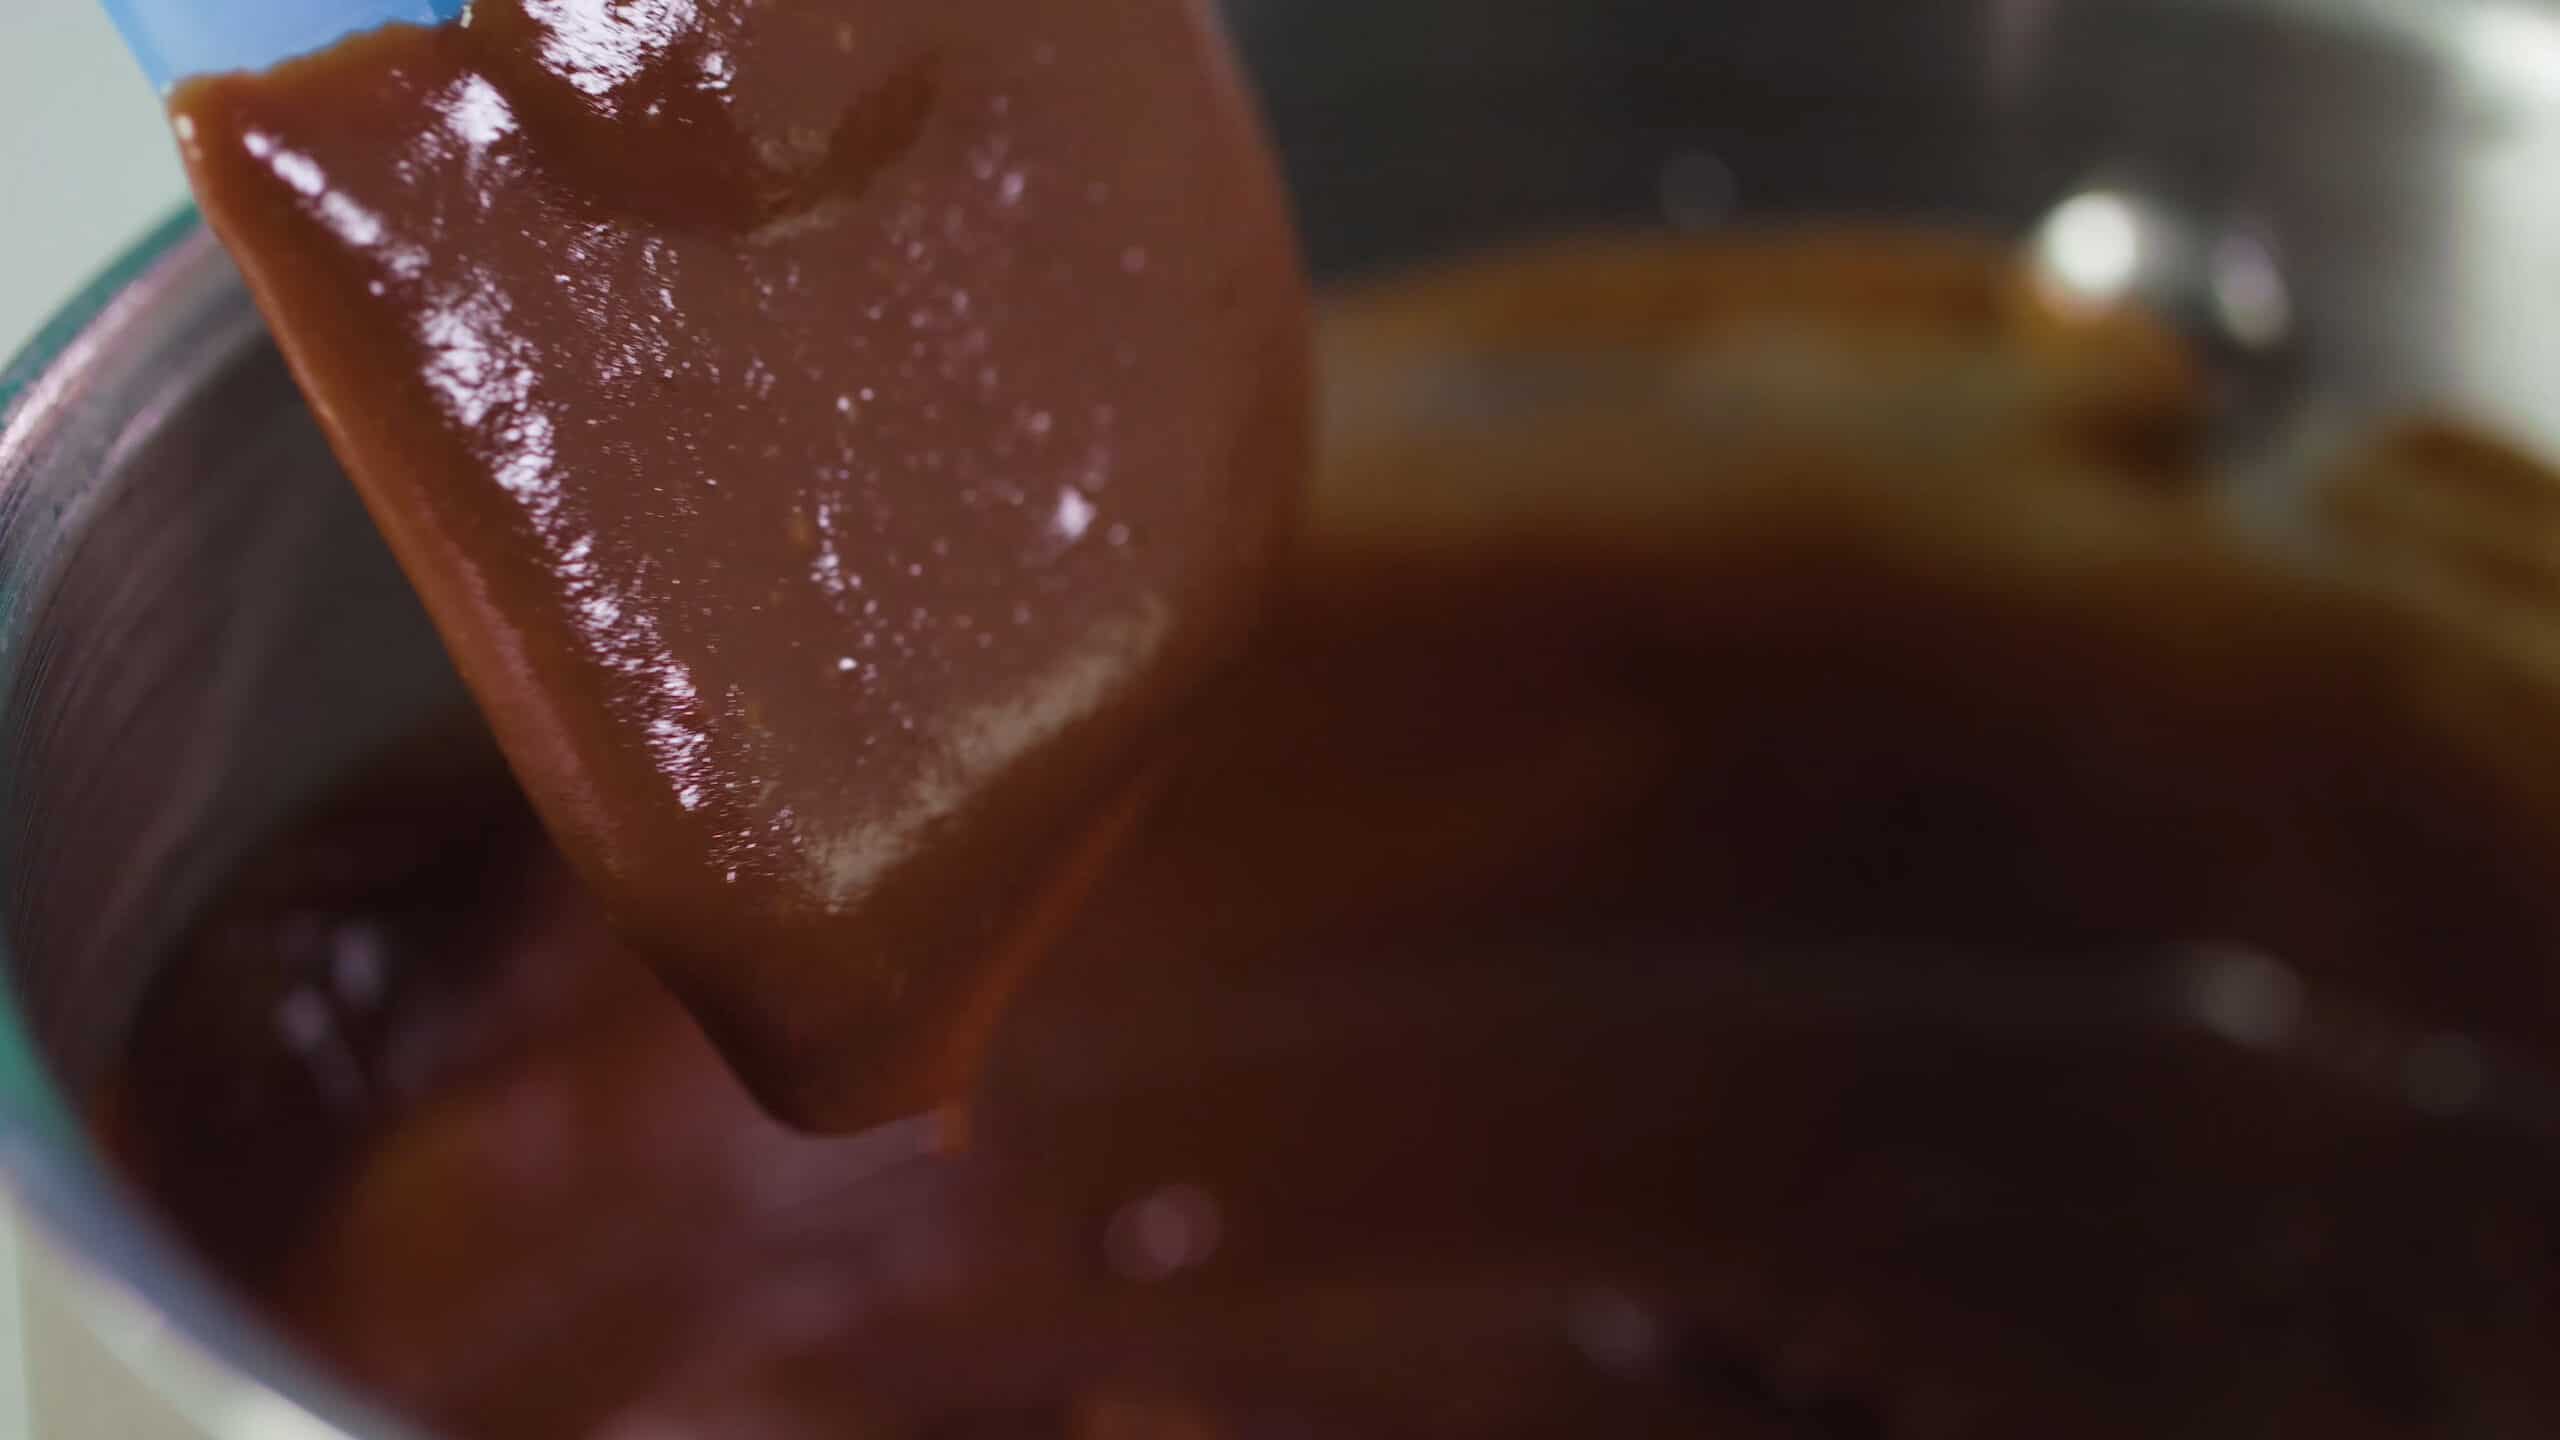 Close up view of plastic spatula covered in chocolate pudding to show texture with remaining pudding in silver pot in background.